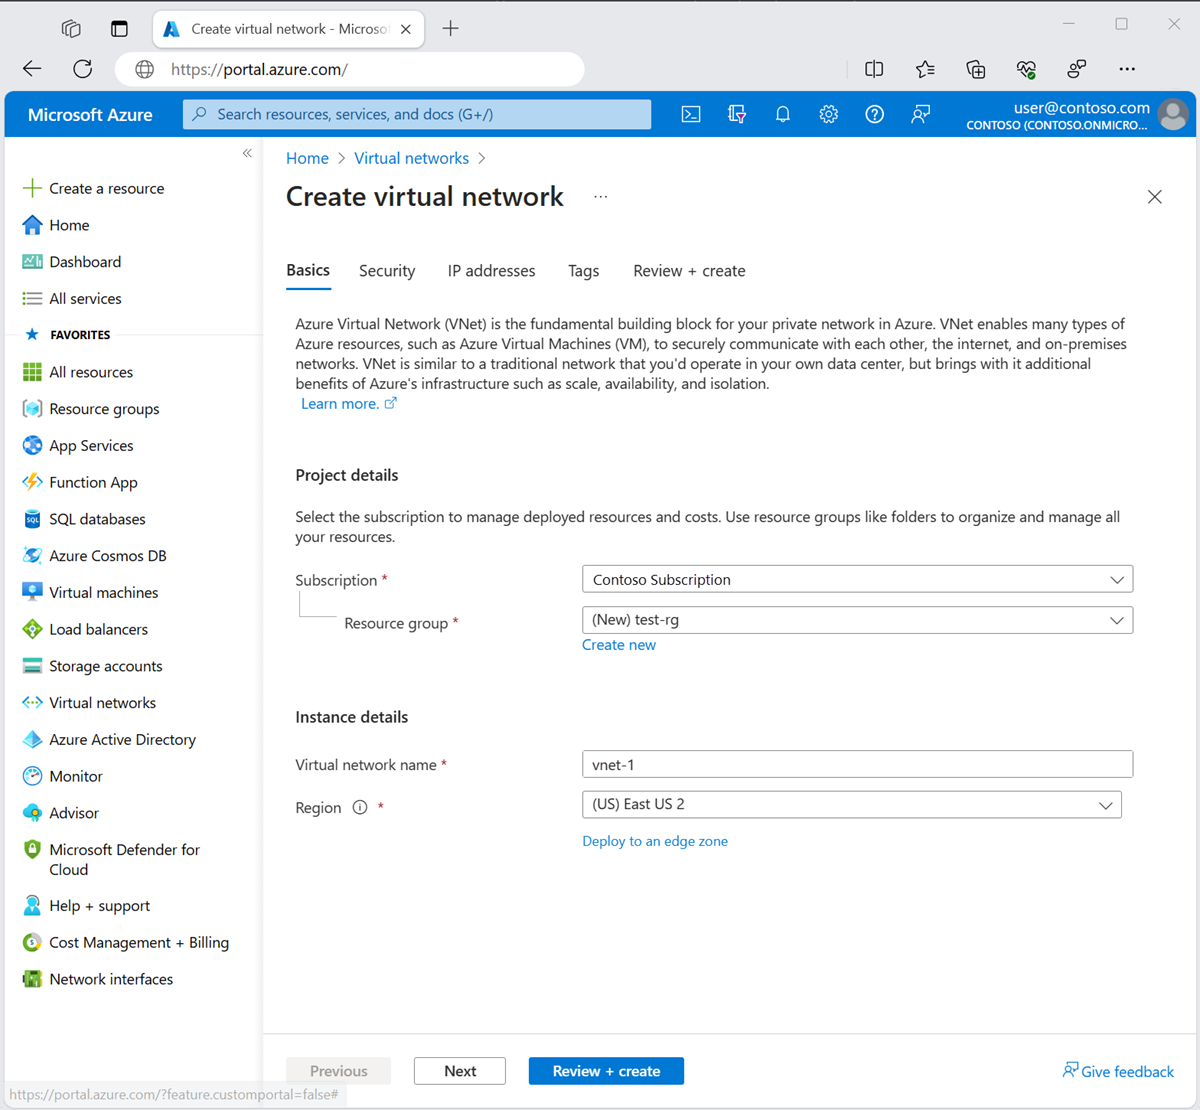 Screenshot of the Basics tab for creating a virtual network in the Azure portal.